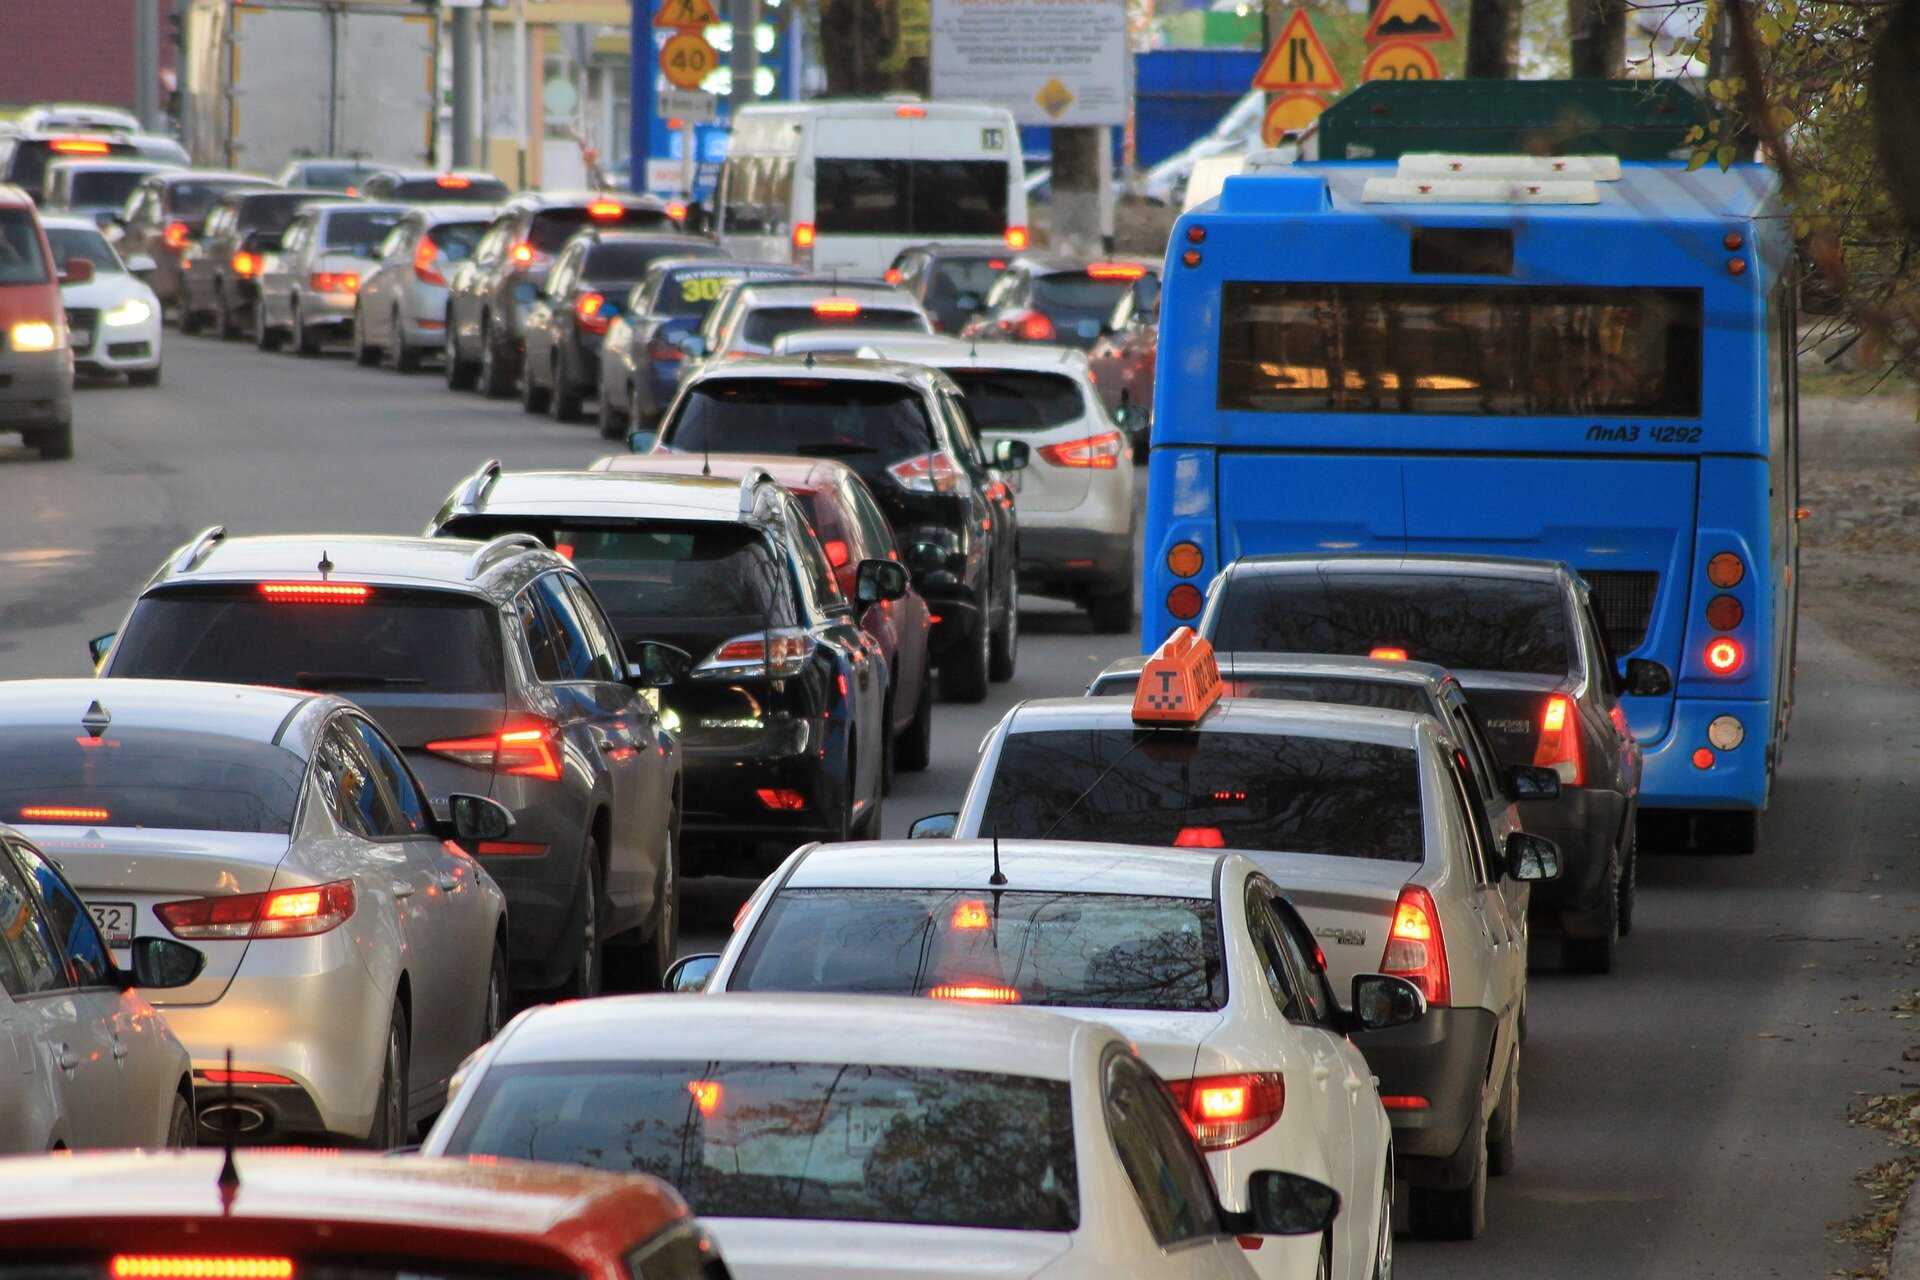 Crowdsourced traffic data can help ease time stuck in traffic, says transport expert